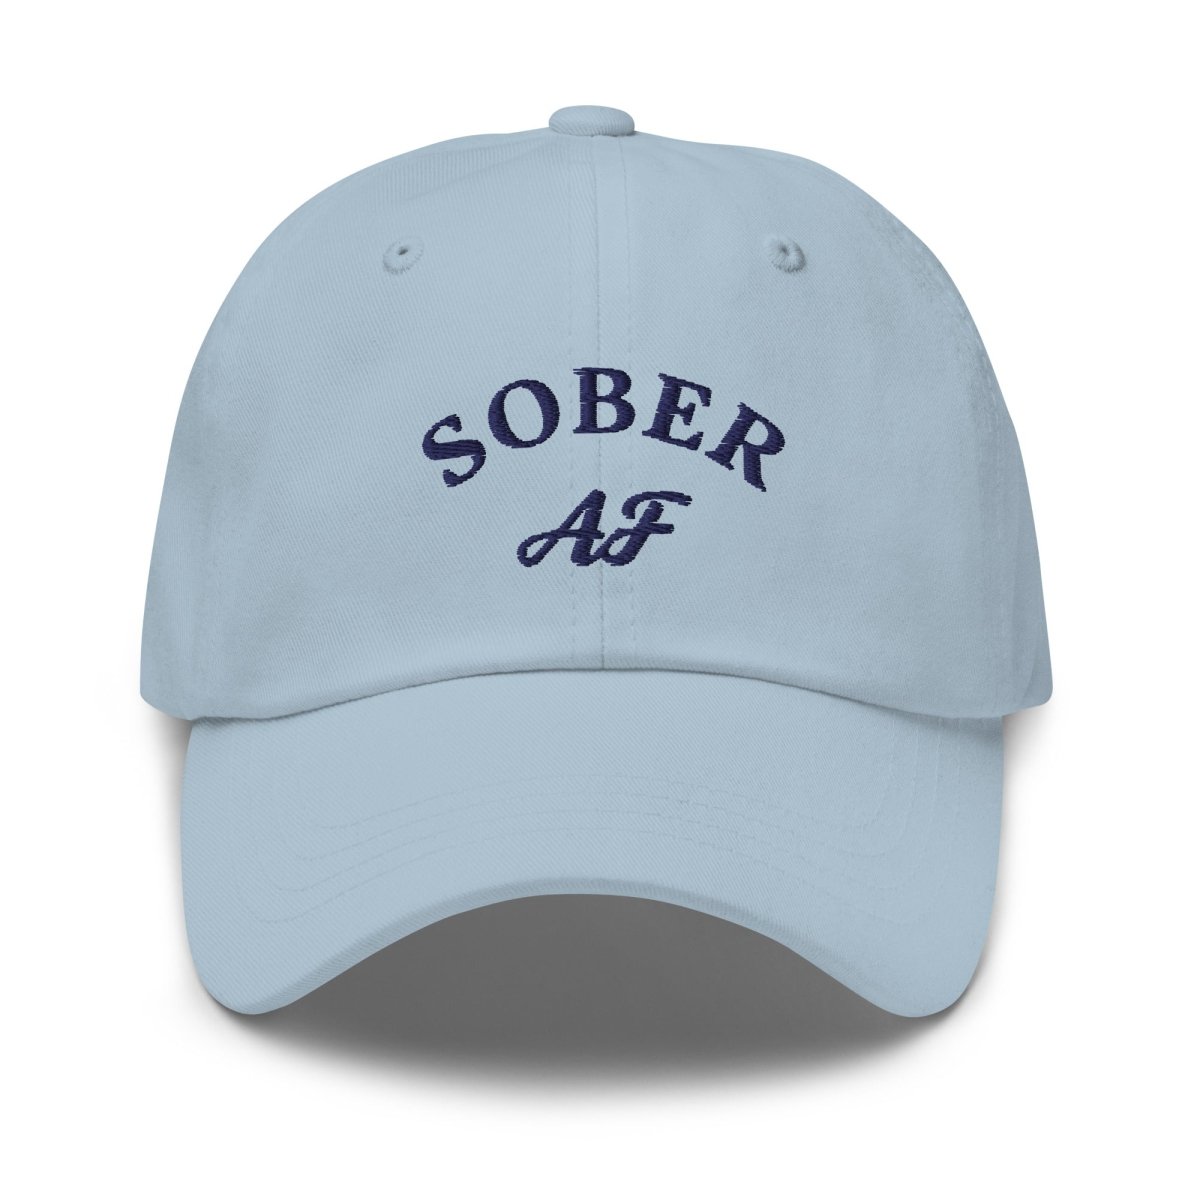 Sober AF: Celebrate Your Sobriety with Style on Our Lighter-Colored Dad Hat - Sobervation